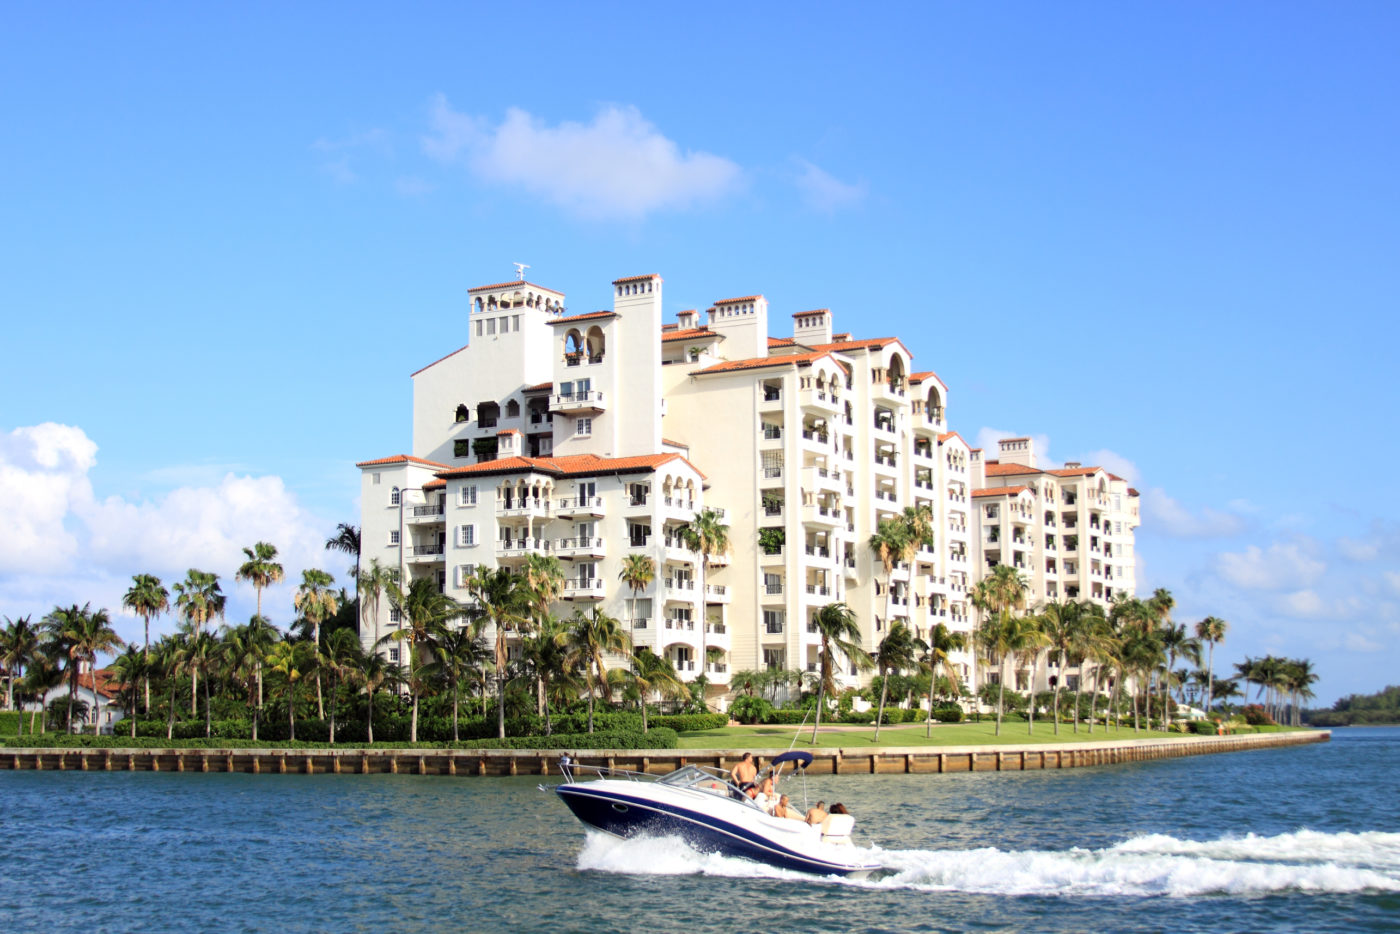 You Can’t Drive To Fisher Island: Inside Miami’s Most Secluded Neighborhood